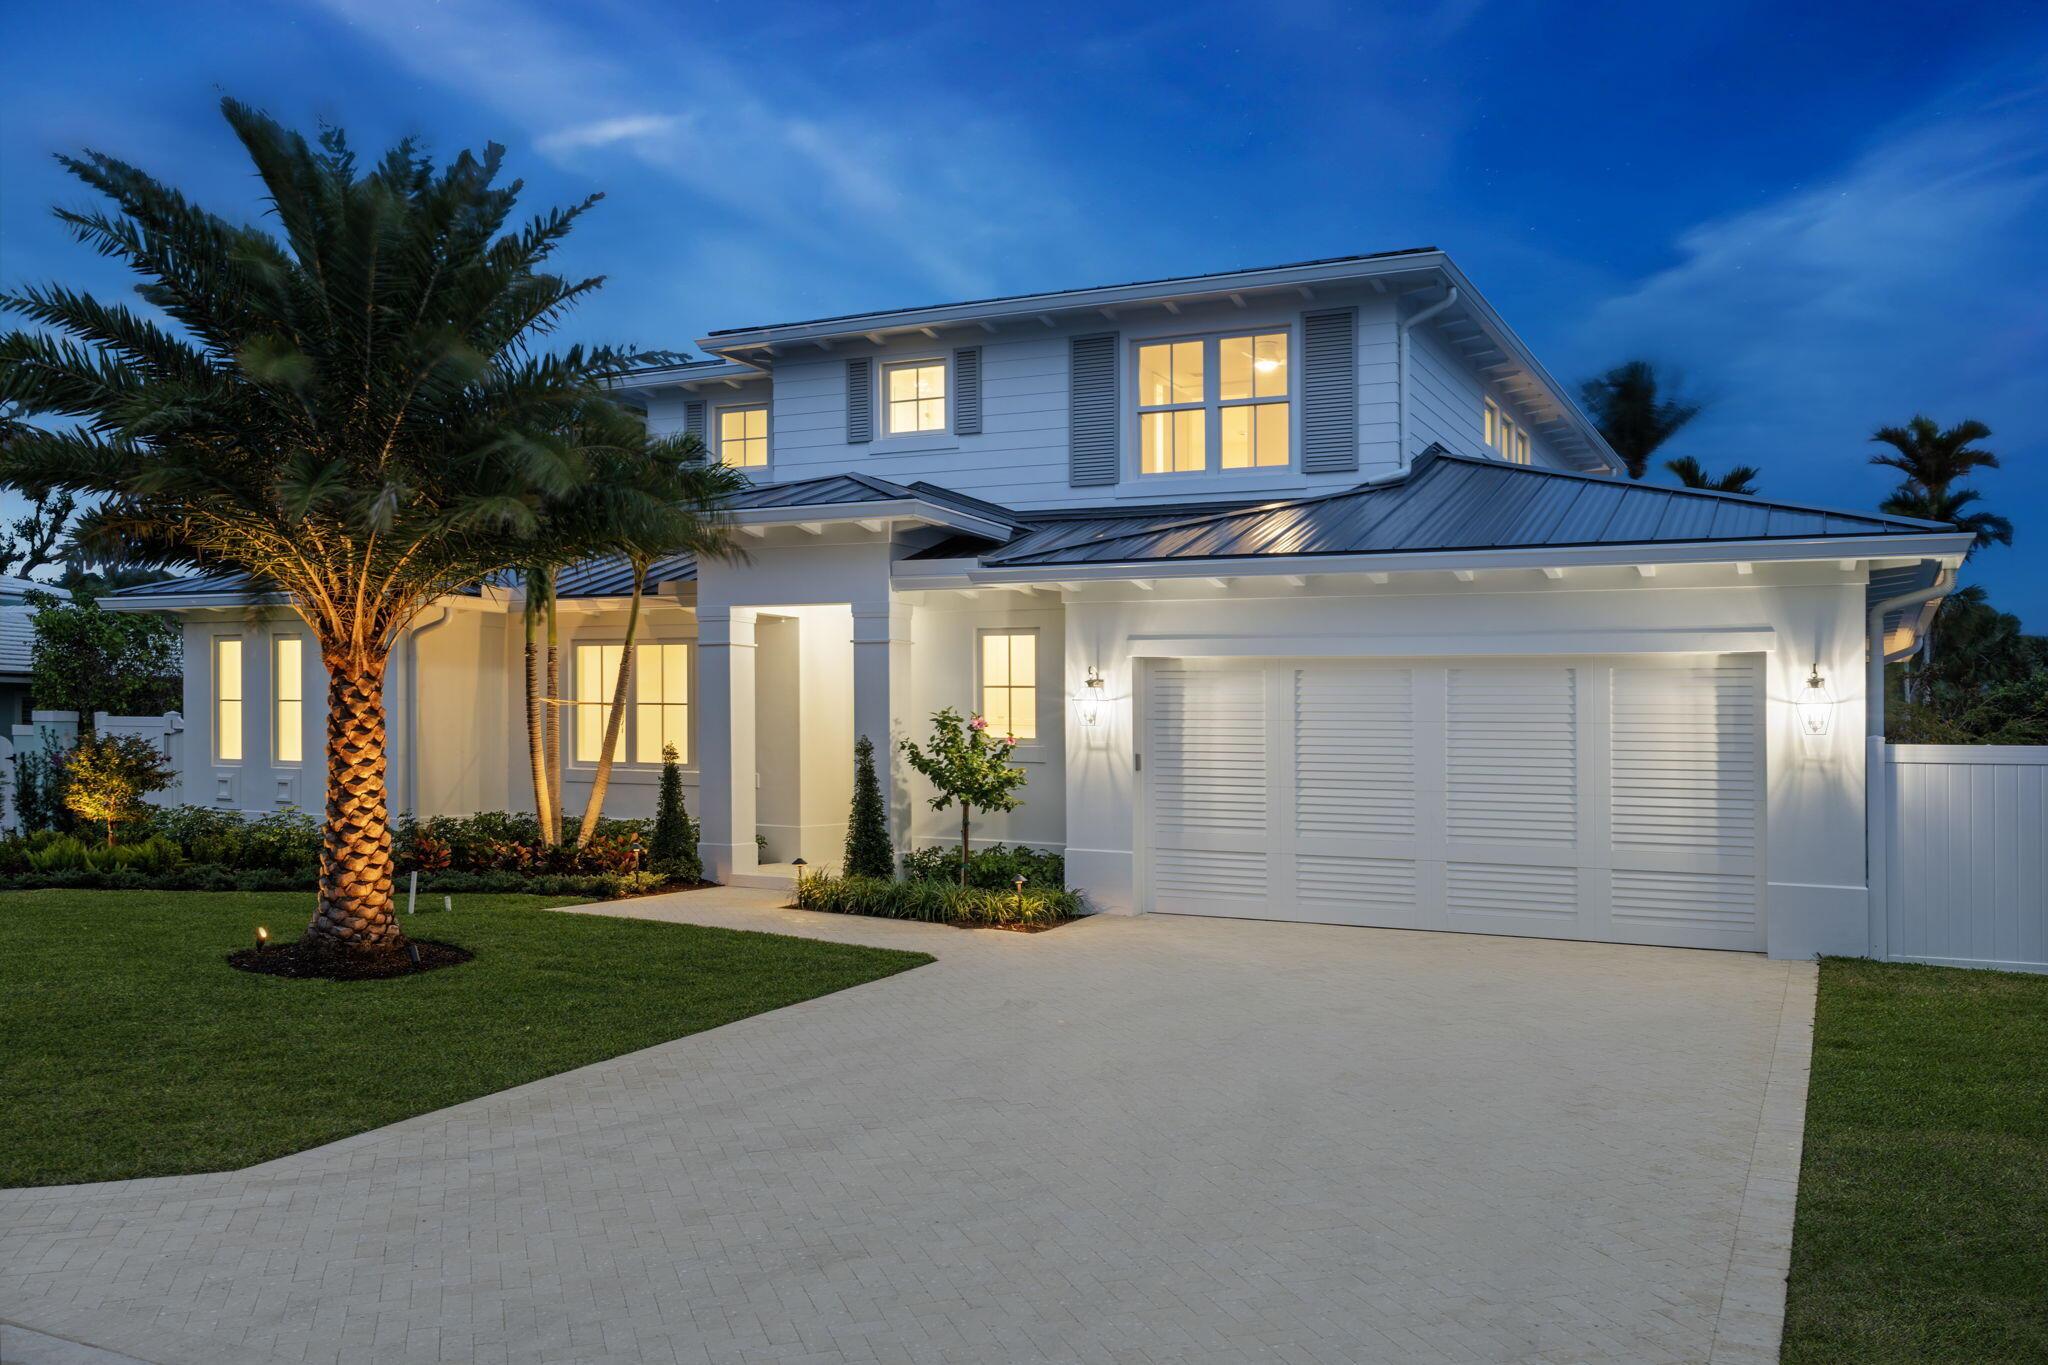 Experience coastal elegance in this 2023 Brand New construction residence, ideally positioned on the southern tip of Jupiter Island within the prestigious Jupiter Inlet Colony. Luxury abounds with French oak floors, built in custom closets, marble countertops in the bathrooms as well as beautiful trim work throughout the home. The kitchen, a culinary haven boasting Wolf and Sub-Zero appliances, caters to the most discerning tastes.This home boasts a first-floor Primary Suite, as well as a dedicated office space. Upstairs, discover views of the iconic Jupiter Lighthouse, accompanied by 3 En Suite Bedrooms and a loft, creating a blend of comfort and sophistication.Step outdoors to find a private pool, spa, and a beautiful summer kitchen amid lush greenery, creating a tranquil escape.